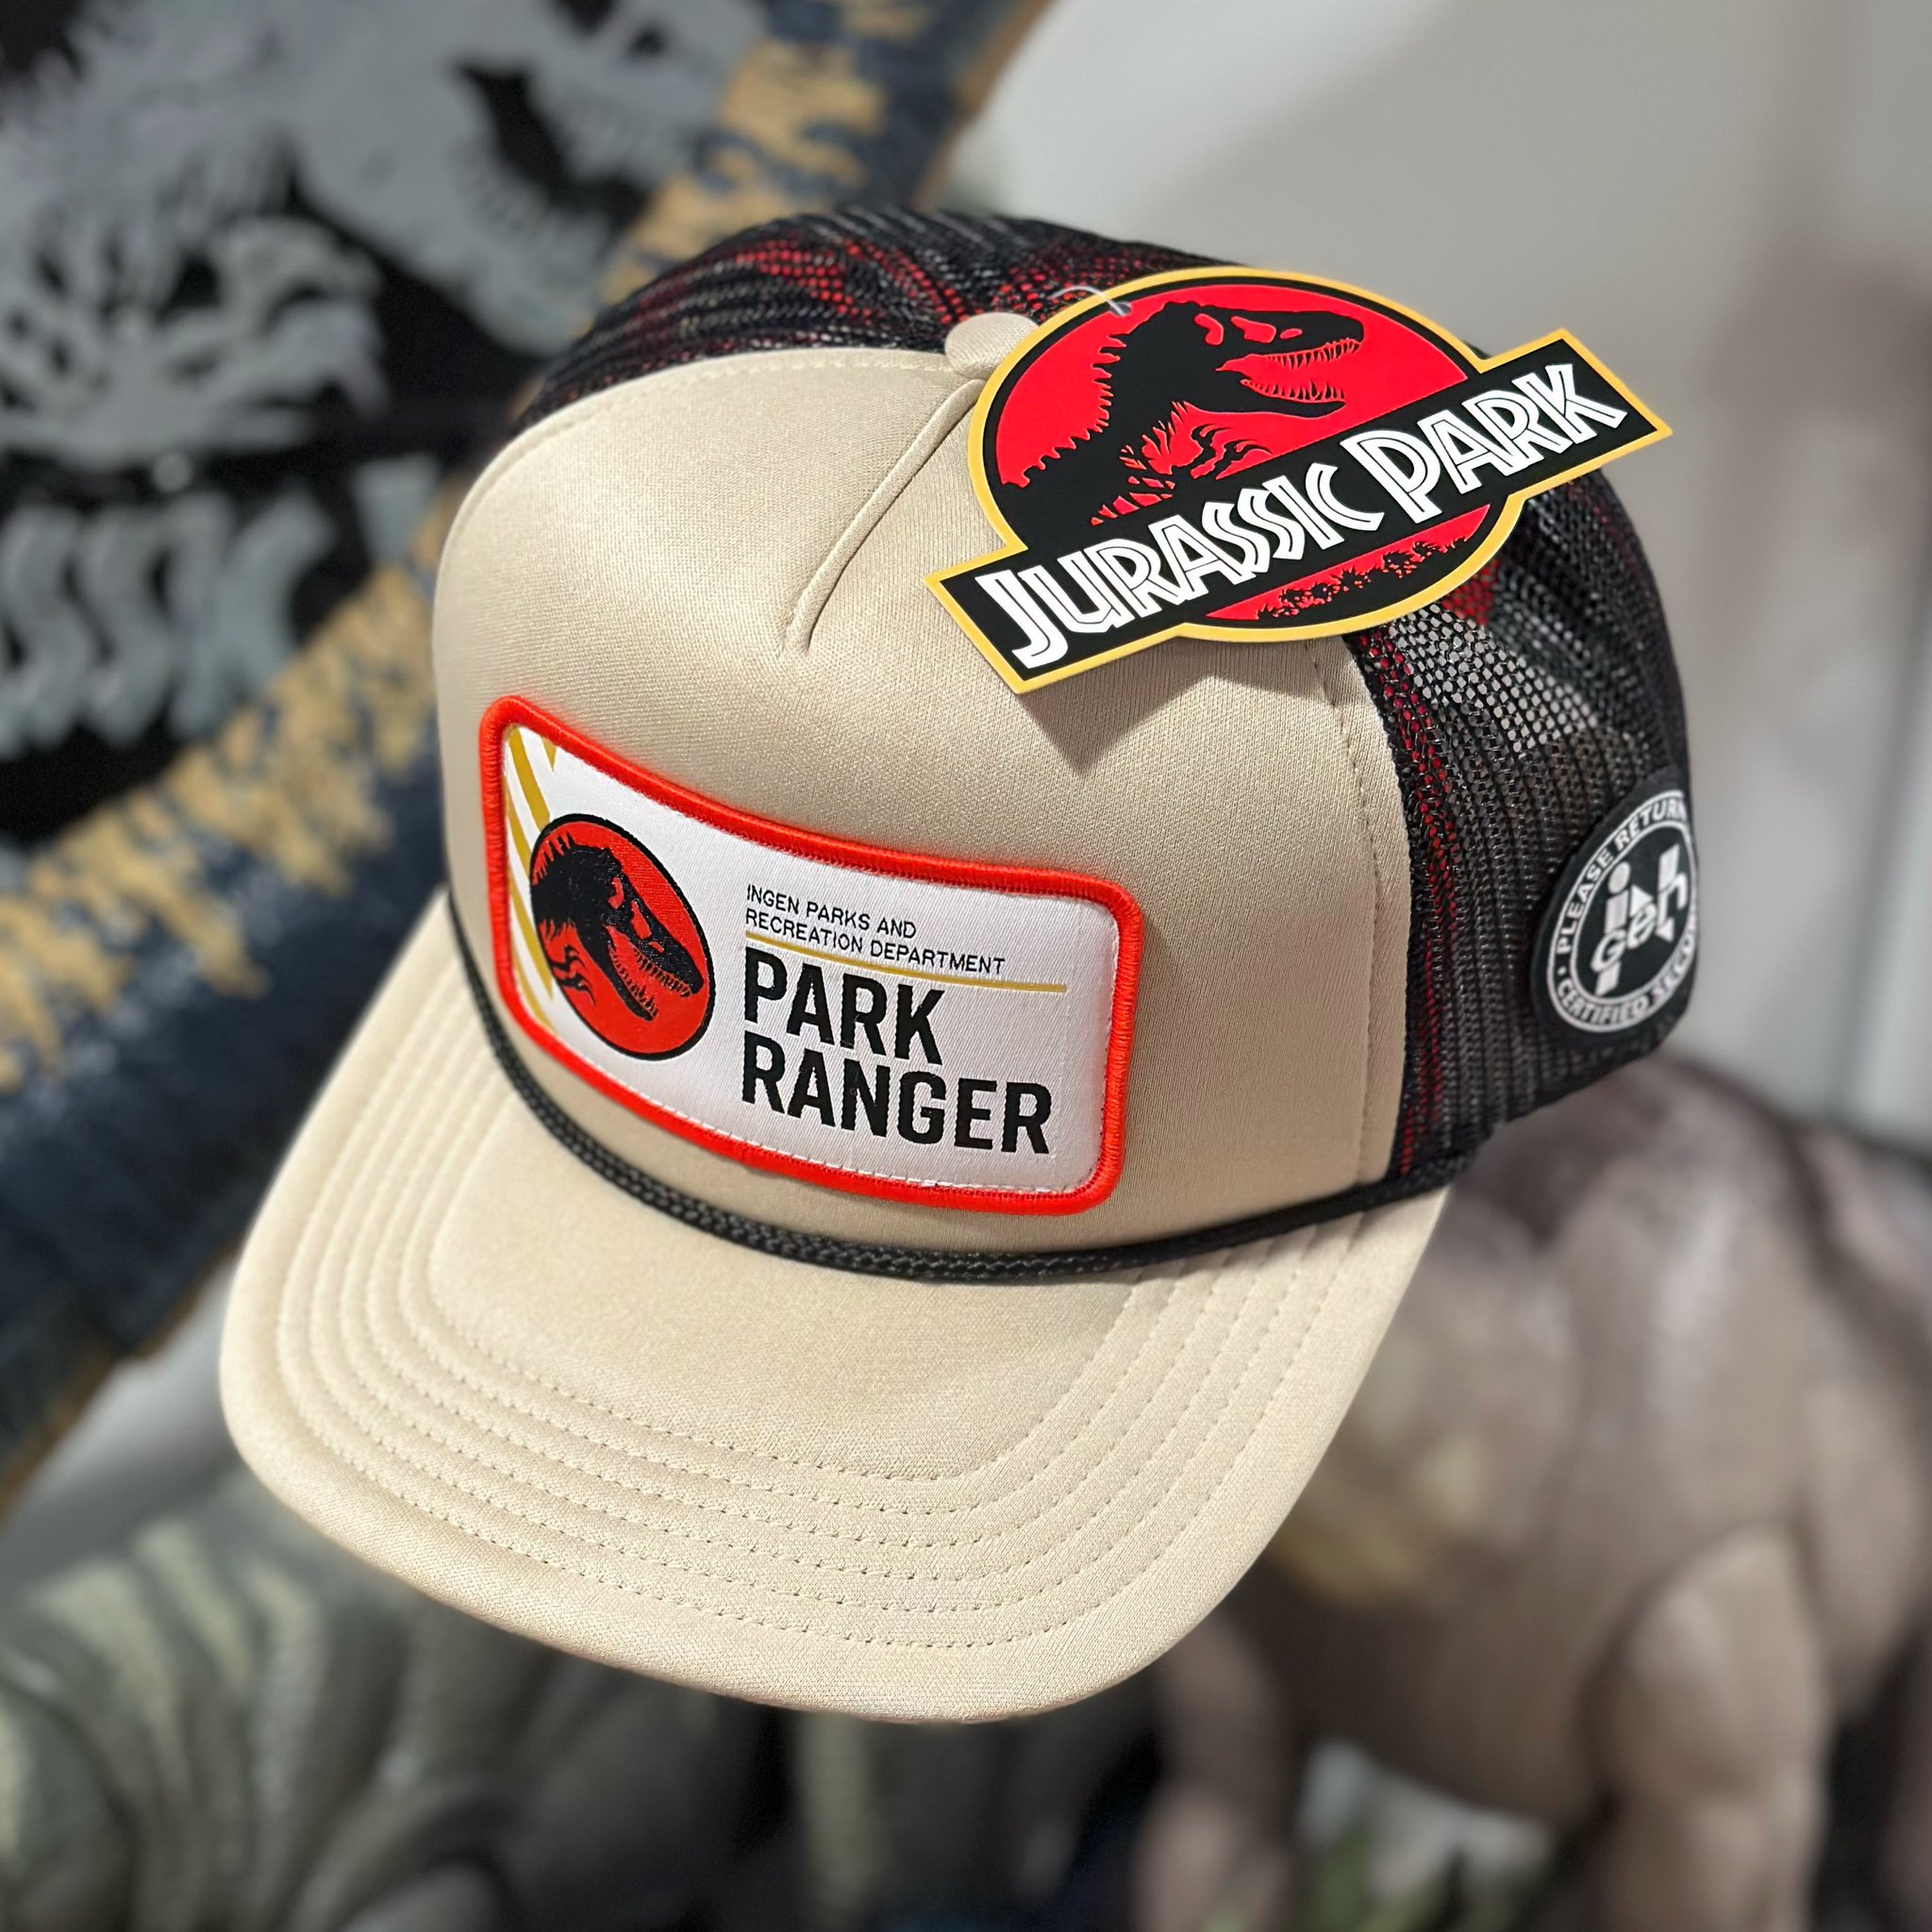 Collect Jurassic on X: IT'S CALLED FASHION! Just got this amazing Park  Ranger hat in the mail — it's peak Jurassic aesthetic for me. Y'all know I  love any kind of “in-universe”